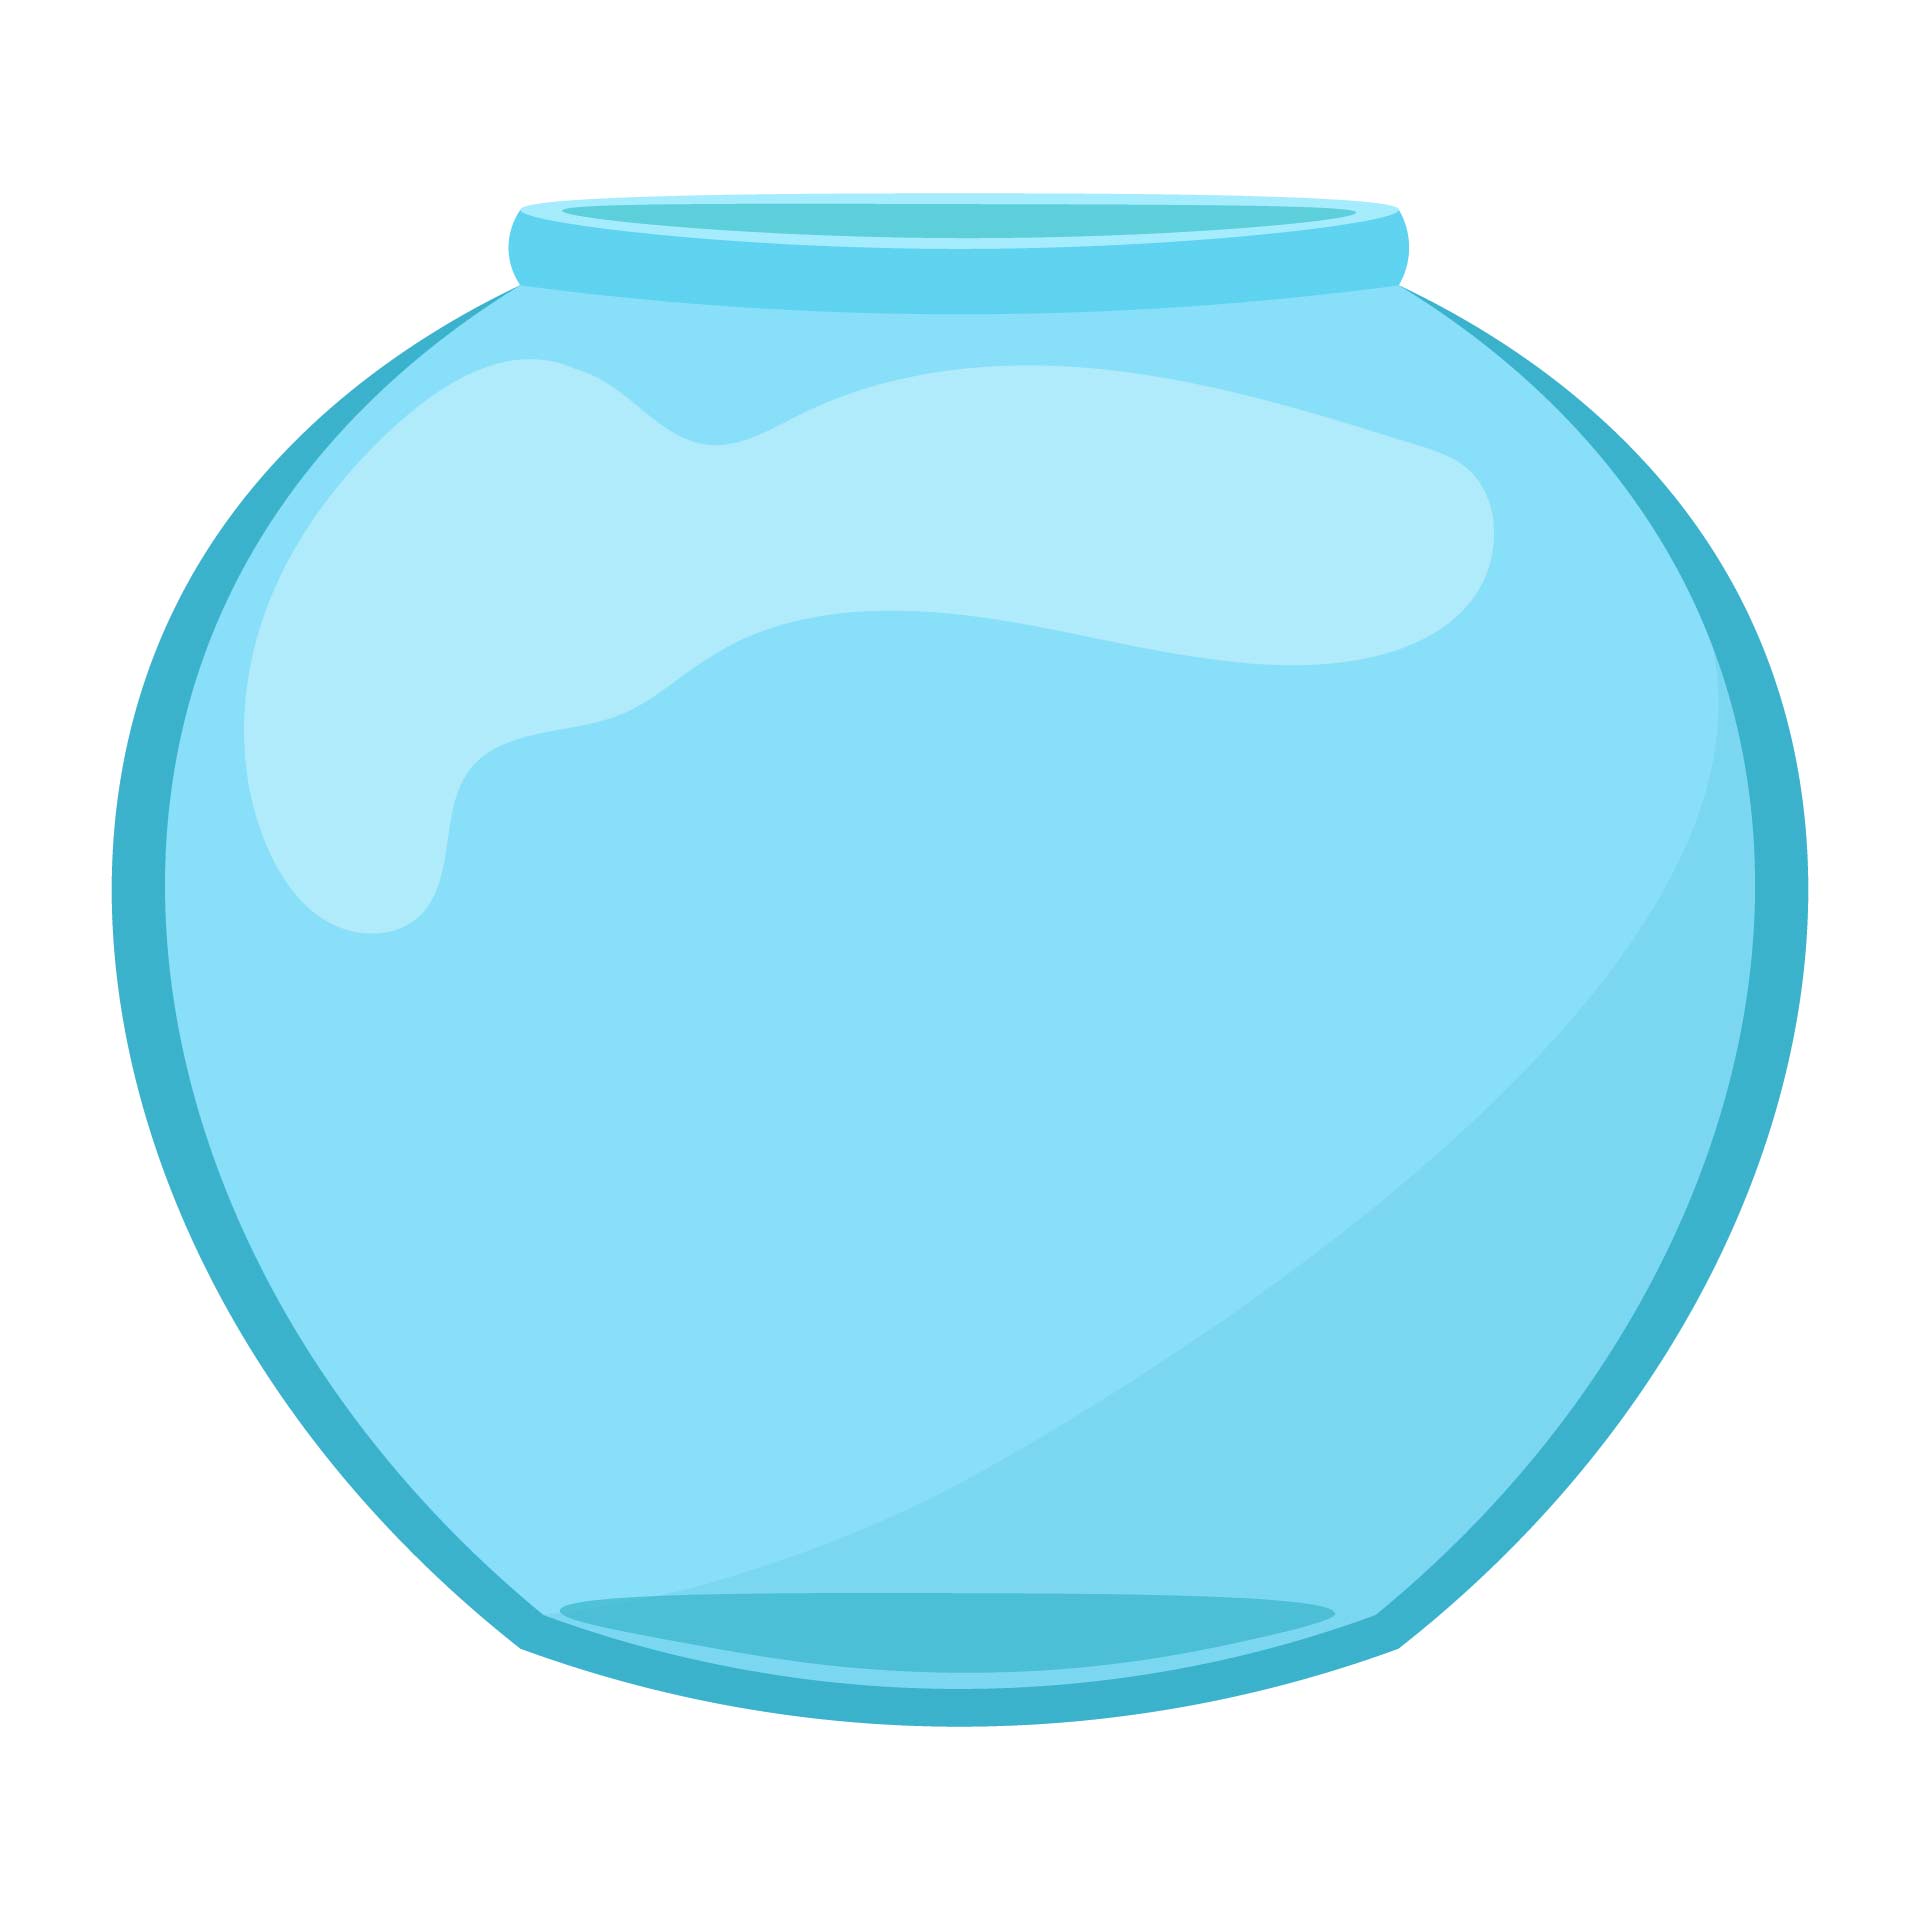 6 Best Images Of Fish Bowl Template Printable Fish Bowl Template 